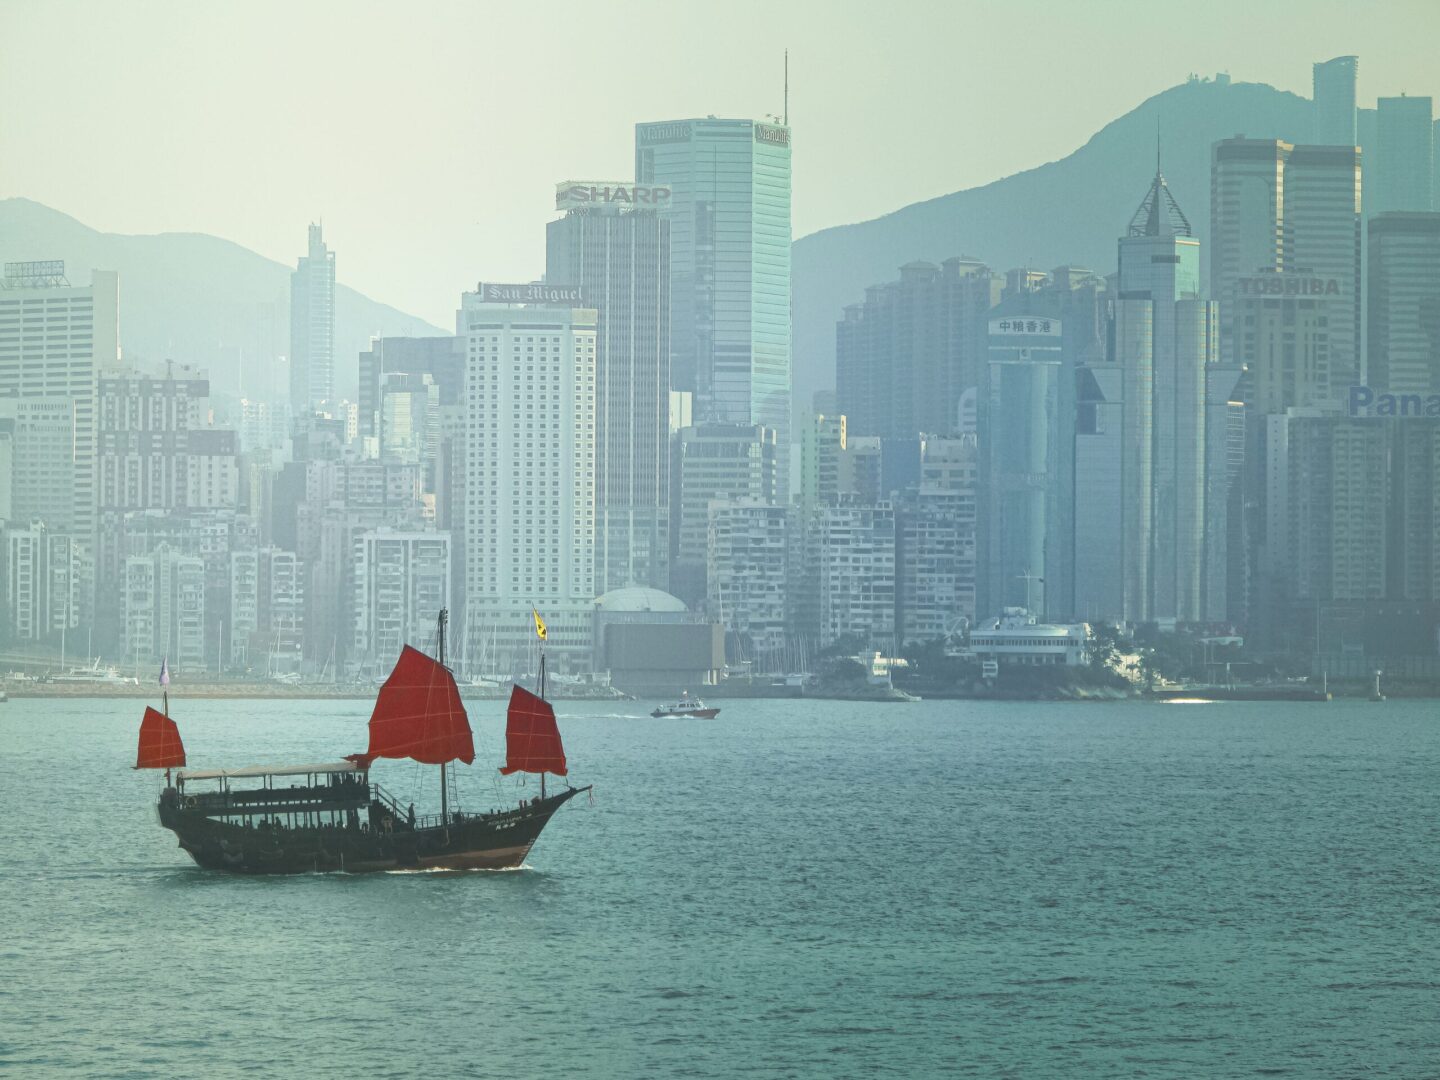 Sampan sailing in Victoria Harbor with Hong Kong, China skyline in the background